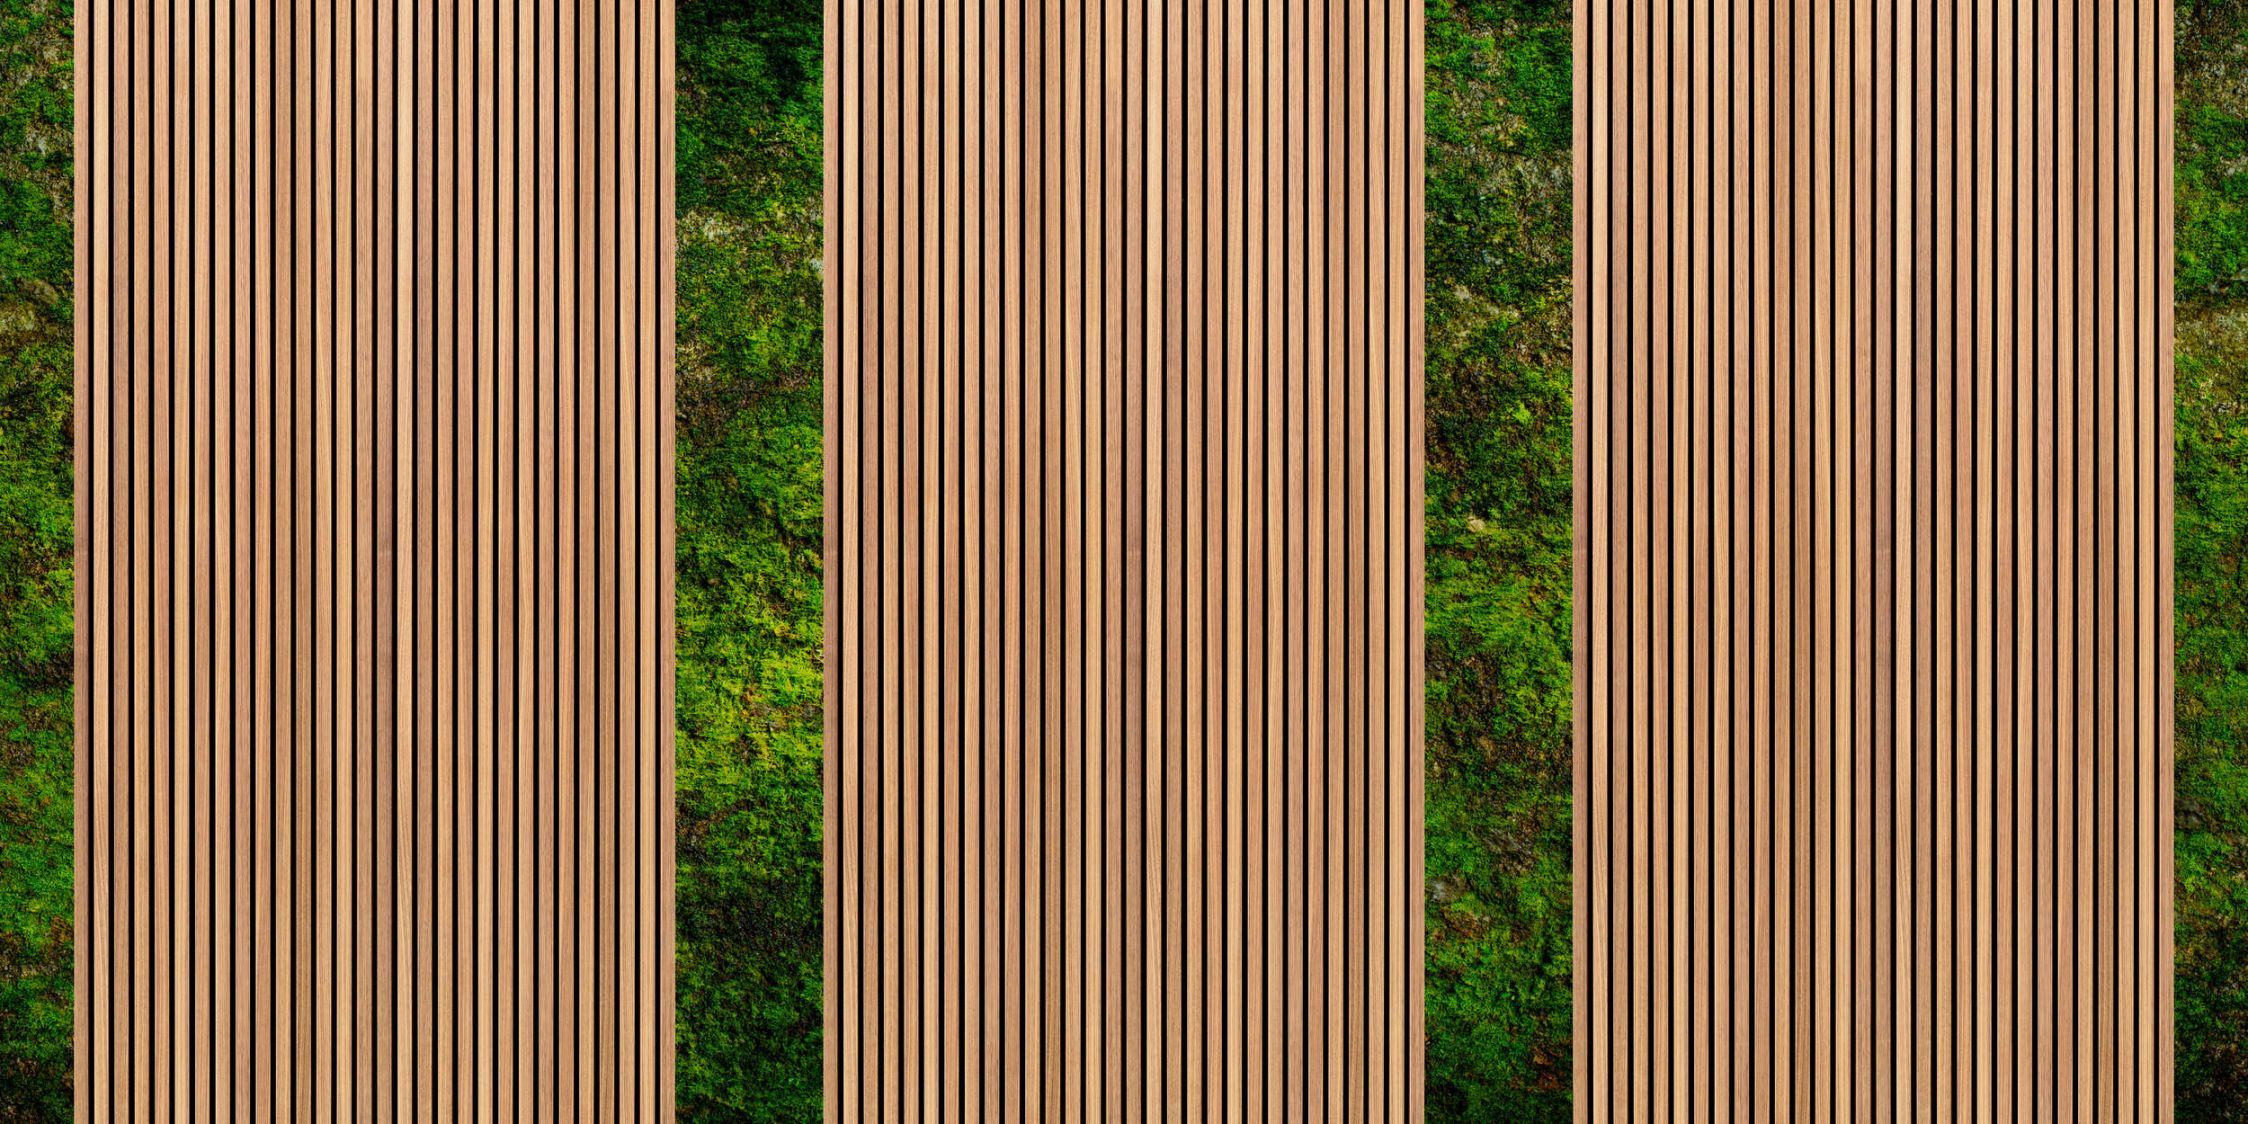             Photo wallpaper »panel 2« - Wide wood panels & moss - Smooth, slightly shiny premium non-woven fabric
        